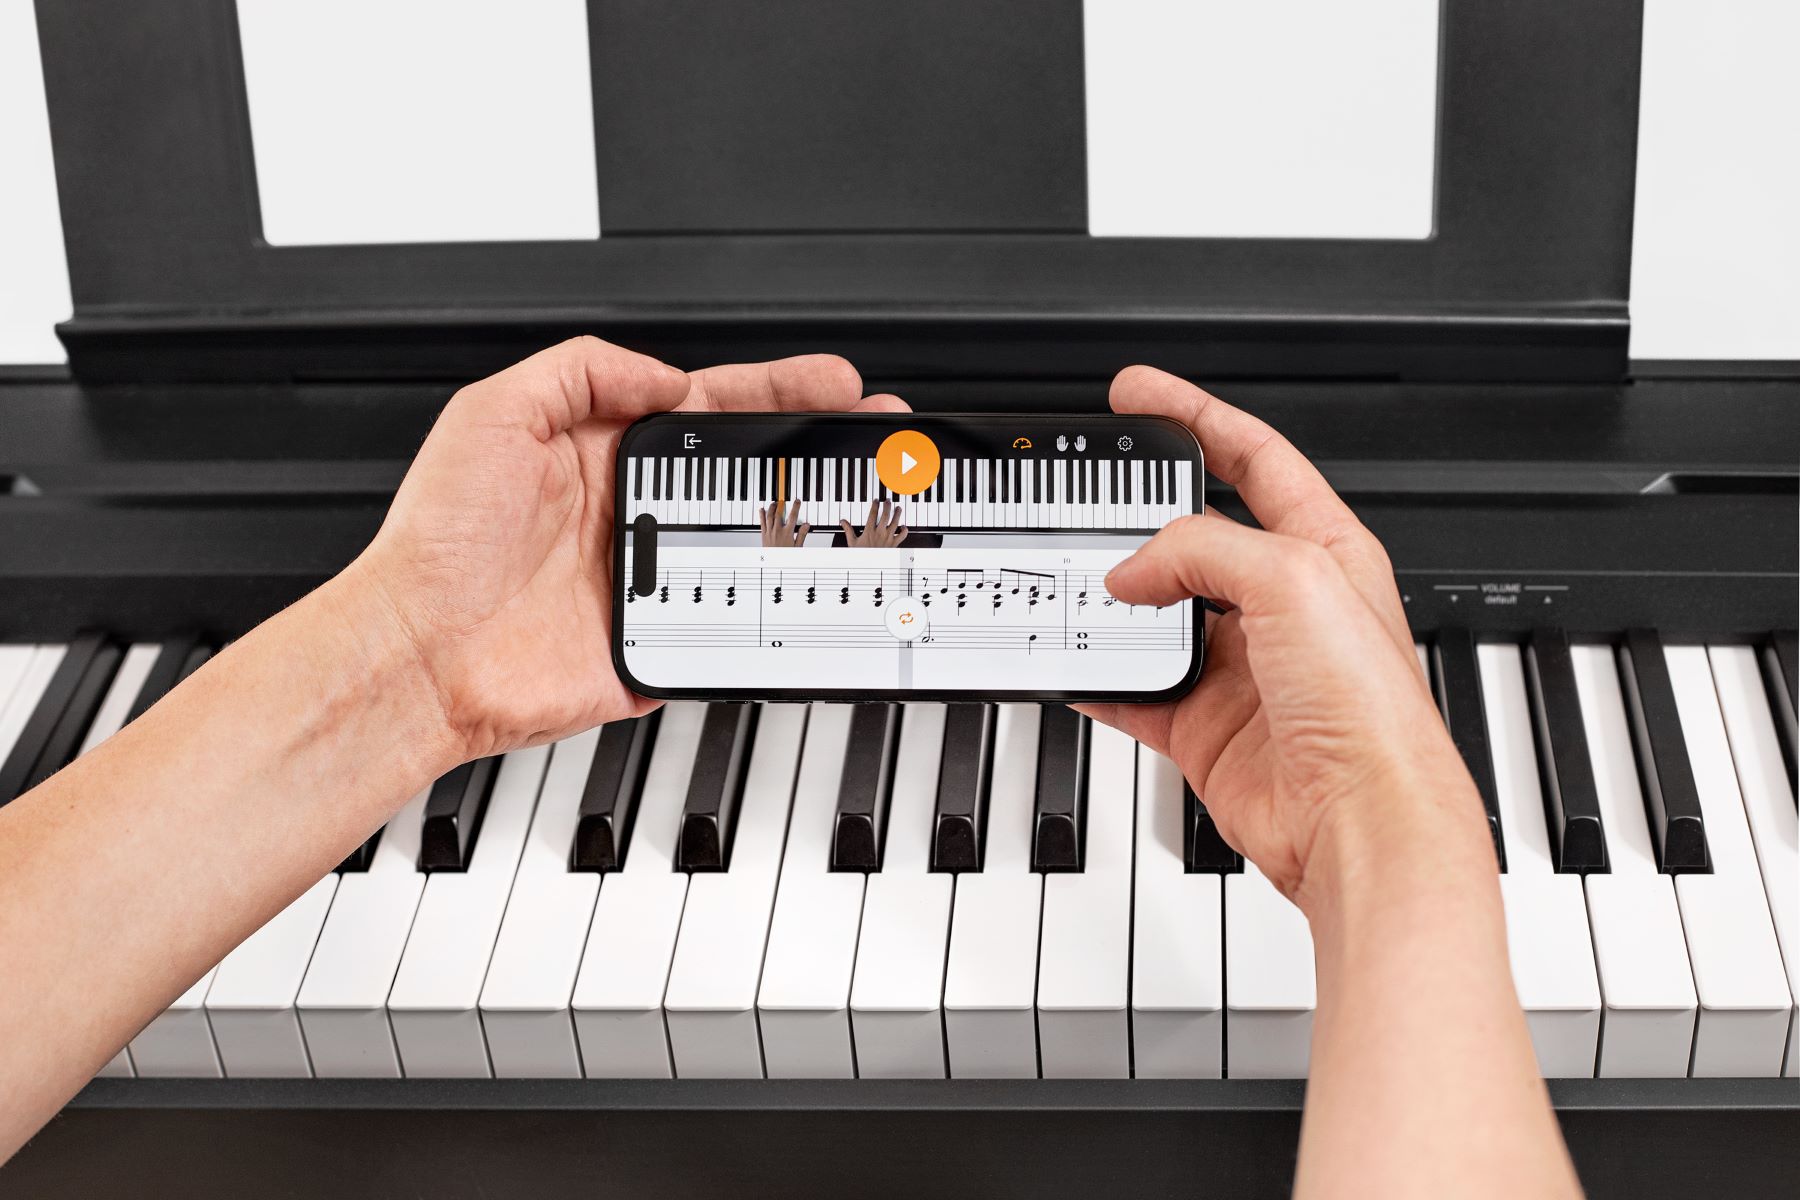 How To Connect A Digital Piano To An Android Phone